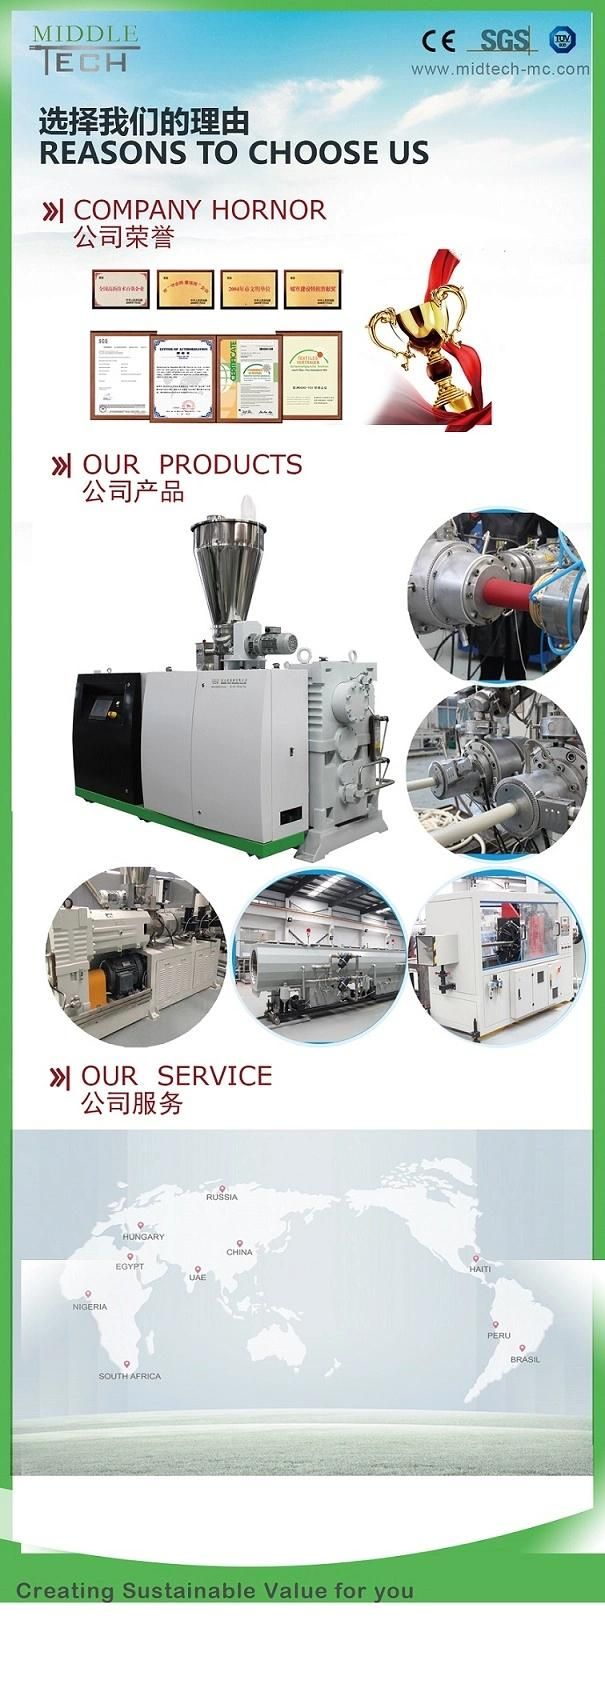 Single Screw Extruder HDPE/PPR Pipe/Tube Extrusion Production Line